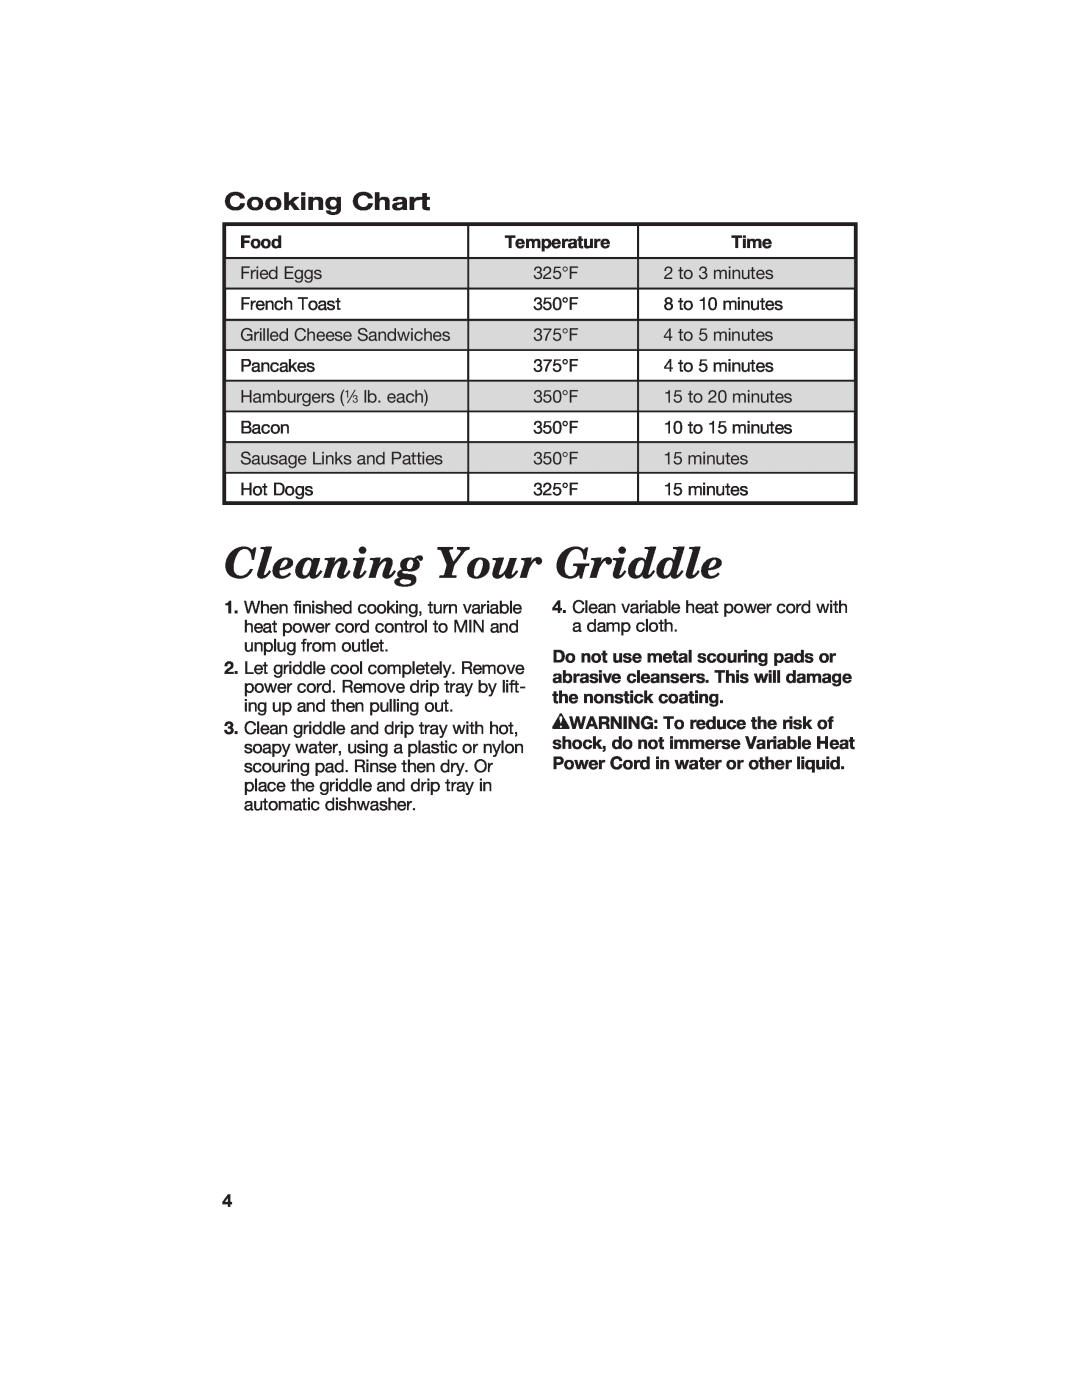 Hamilton Beach 840098400 manual Cleaning Your Griddle, Cooking Chart, Food, Temperature, Time 